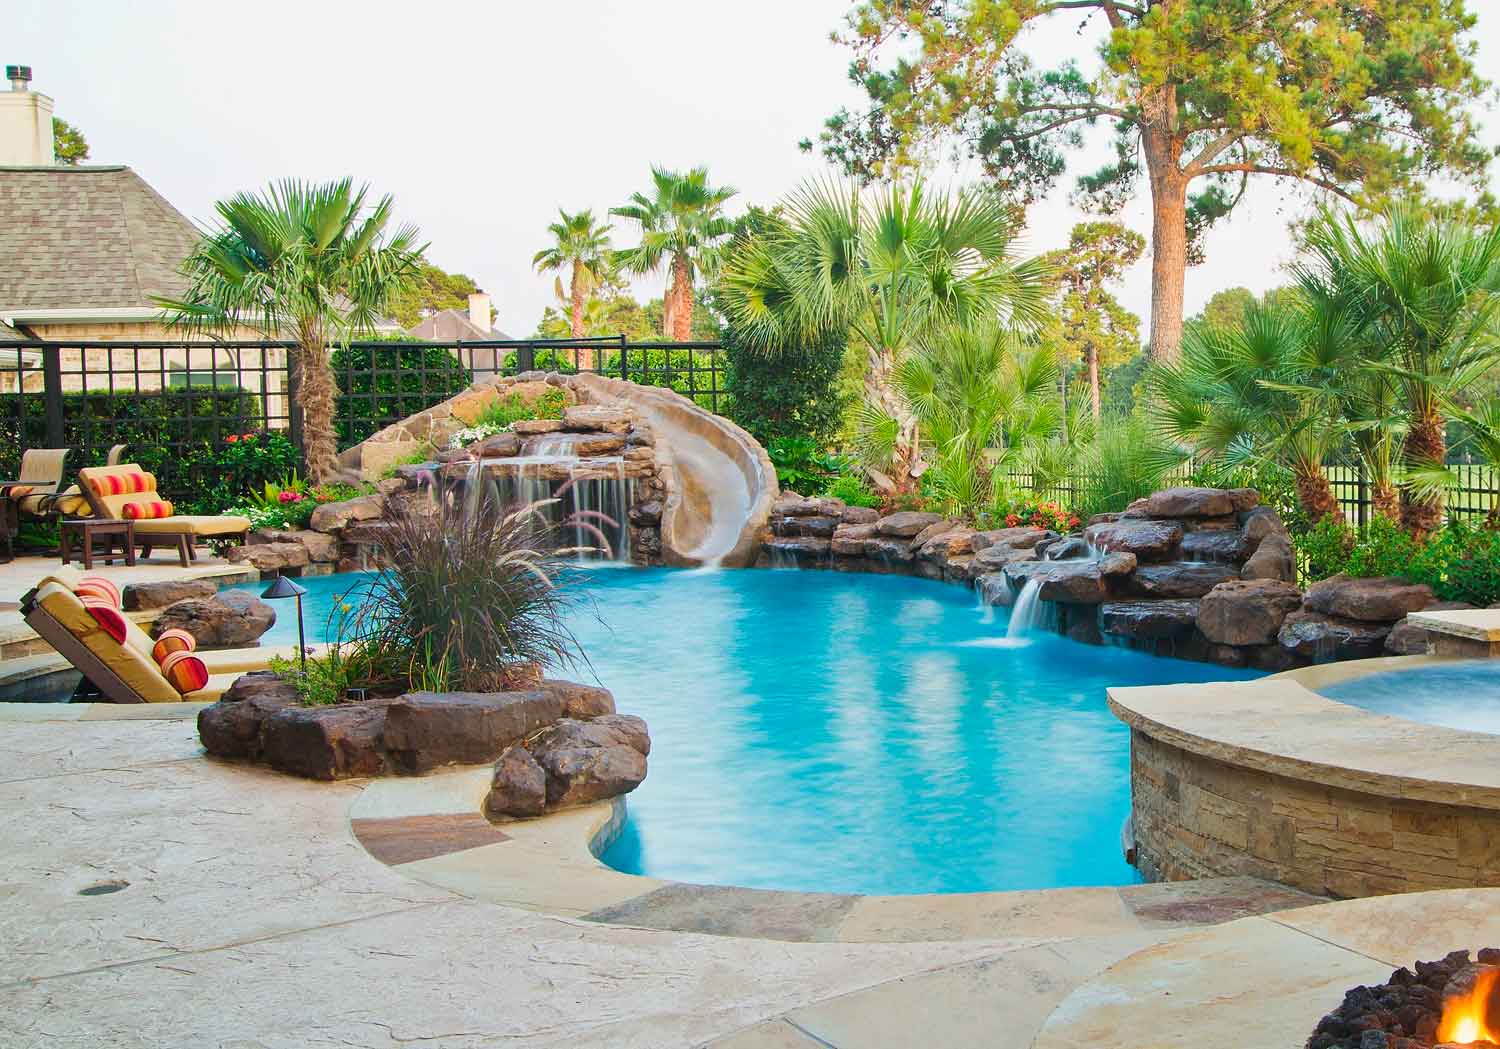 Houston Pool Builders specializing in the construction of inground pools and outdoor living amenities.